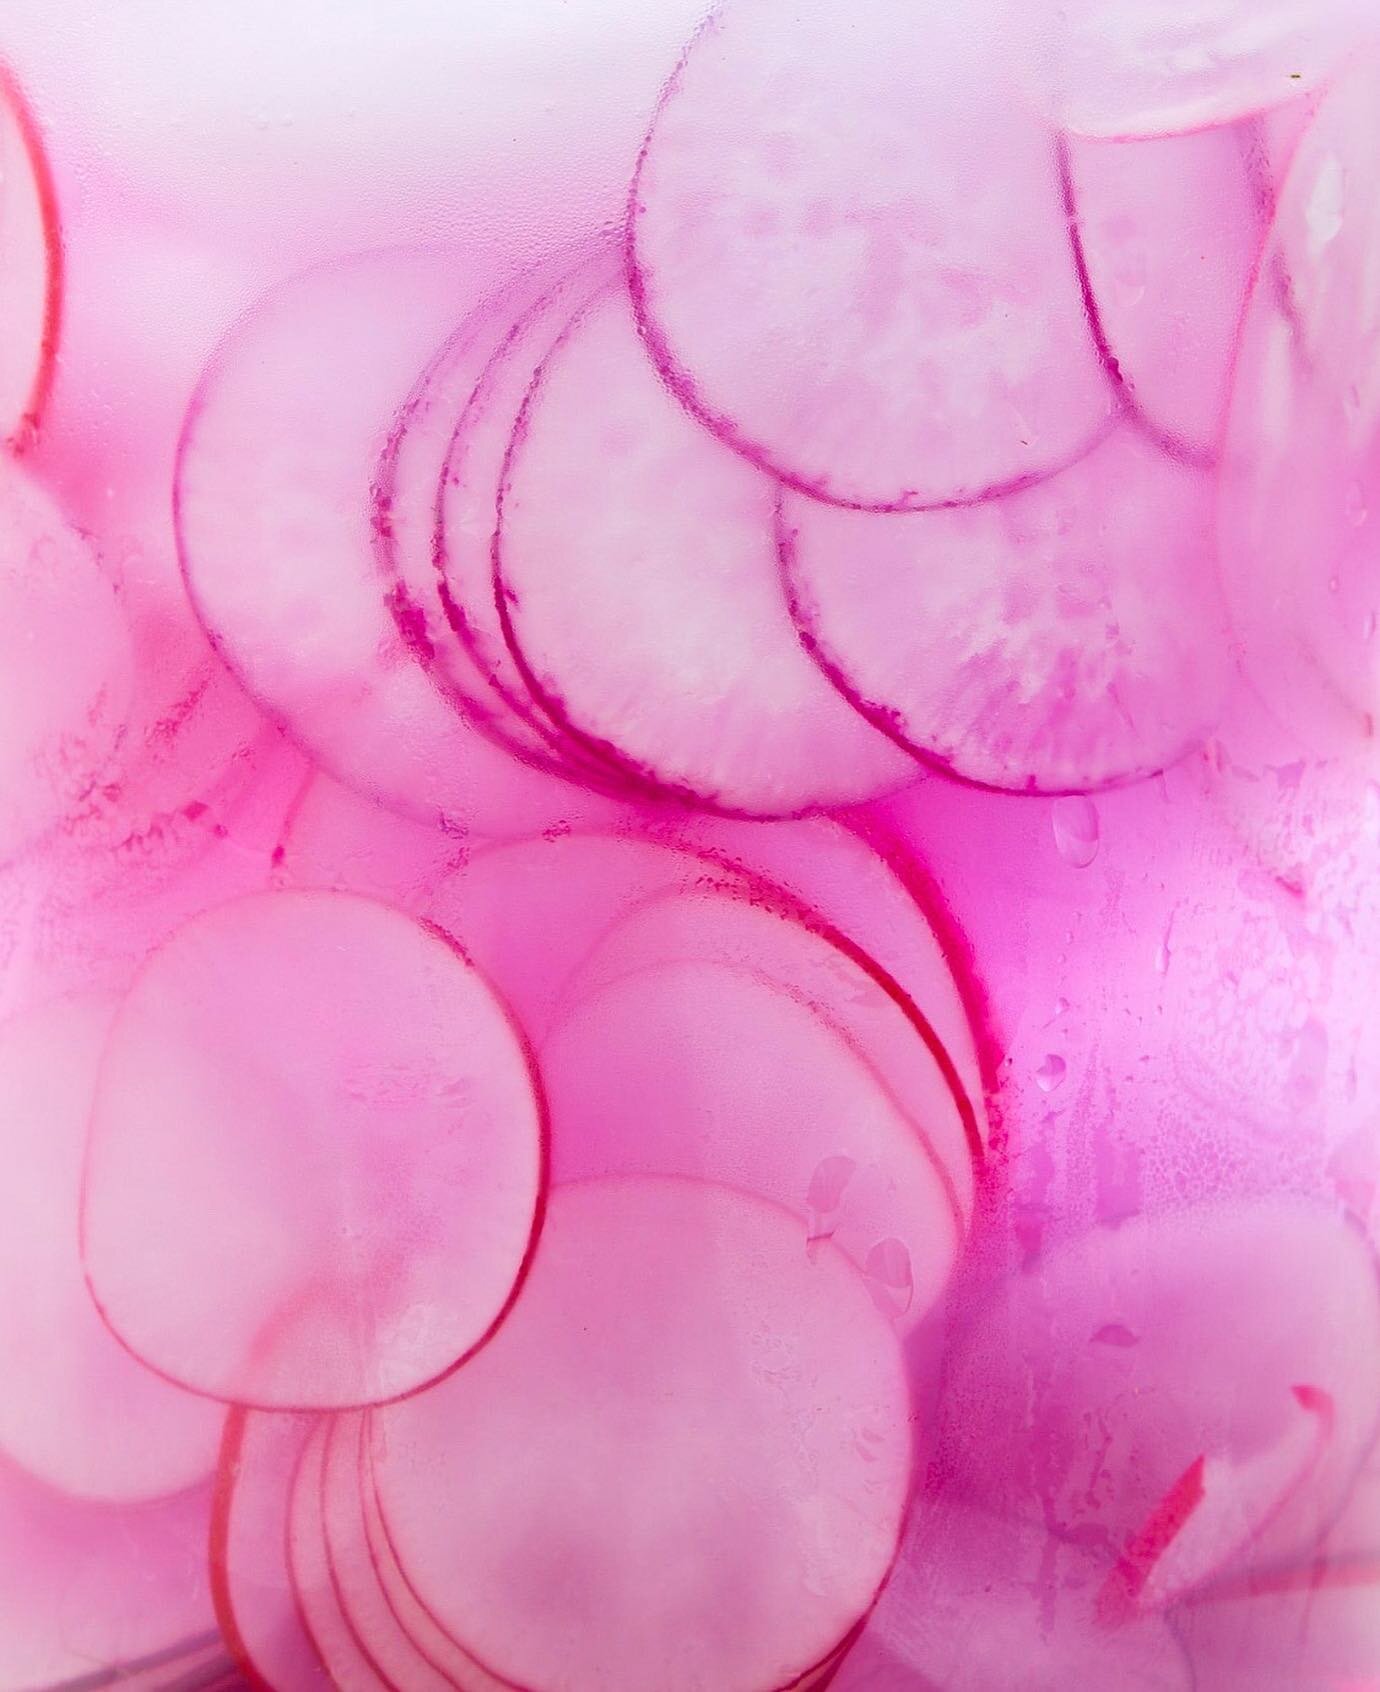 Thinly sliced radishes floating in a quart container of ice water. For @abramsbooks. Published in Salad Freak.